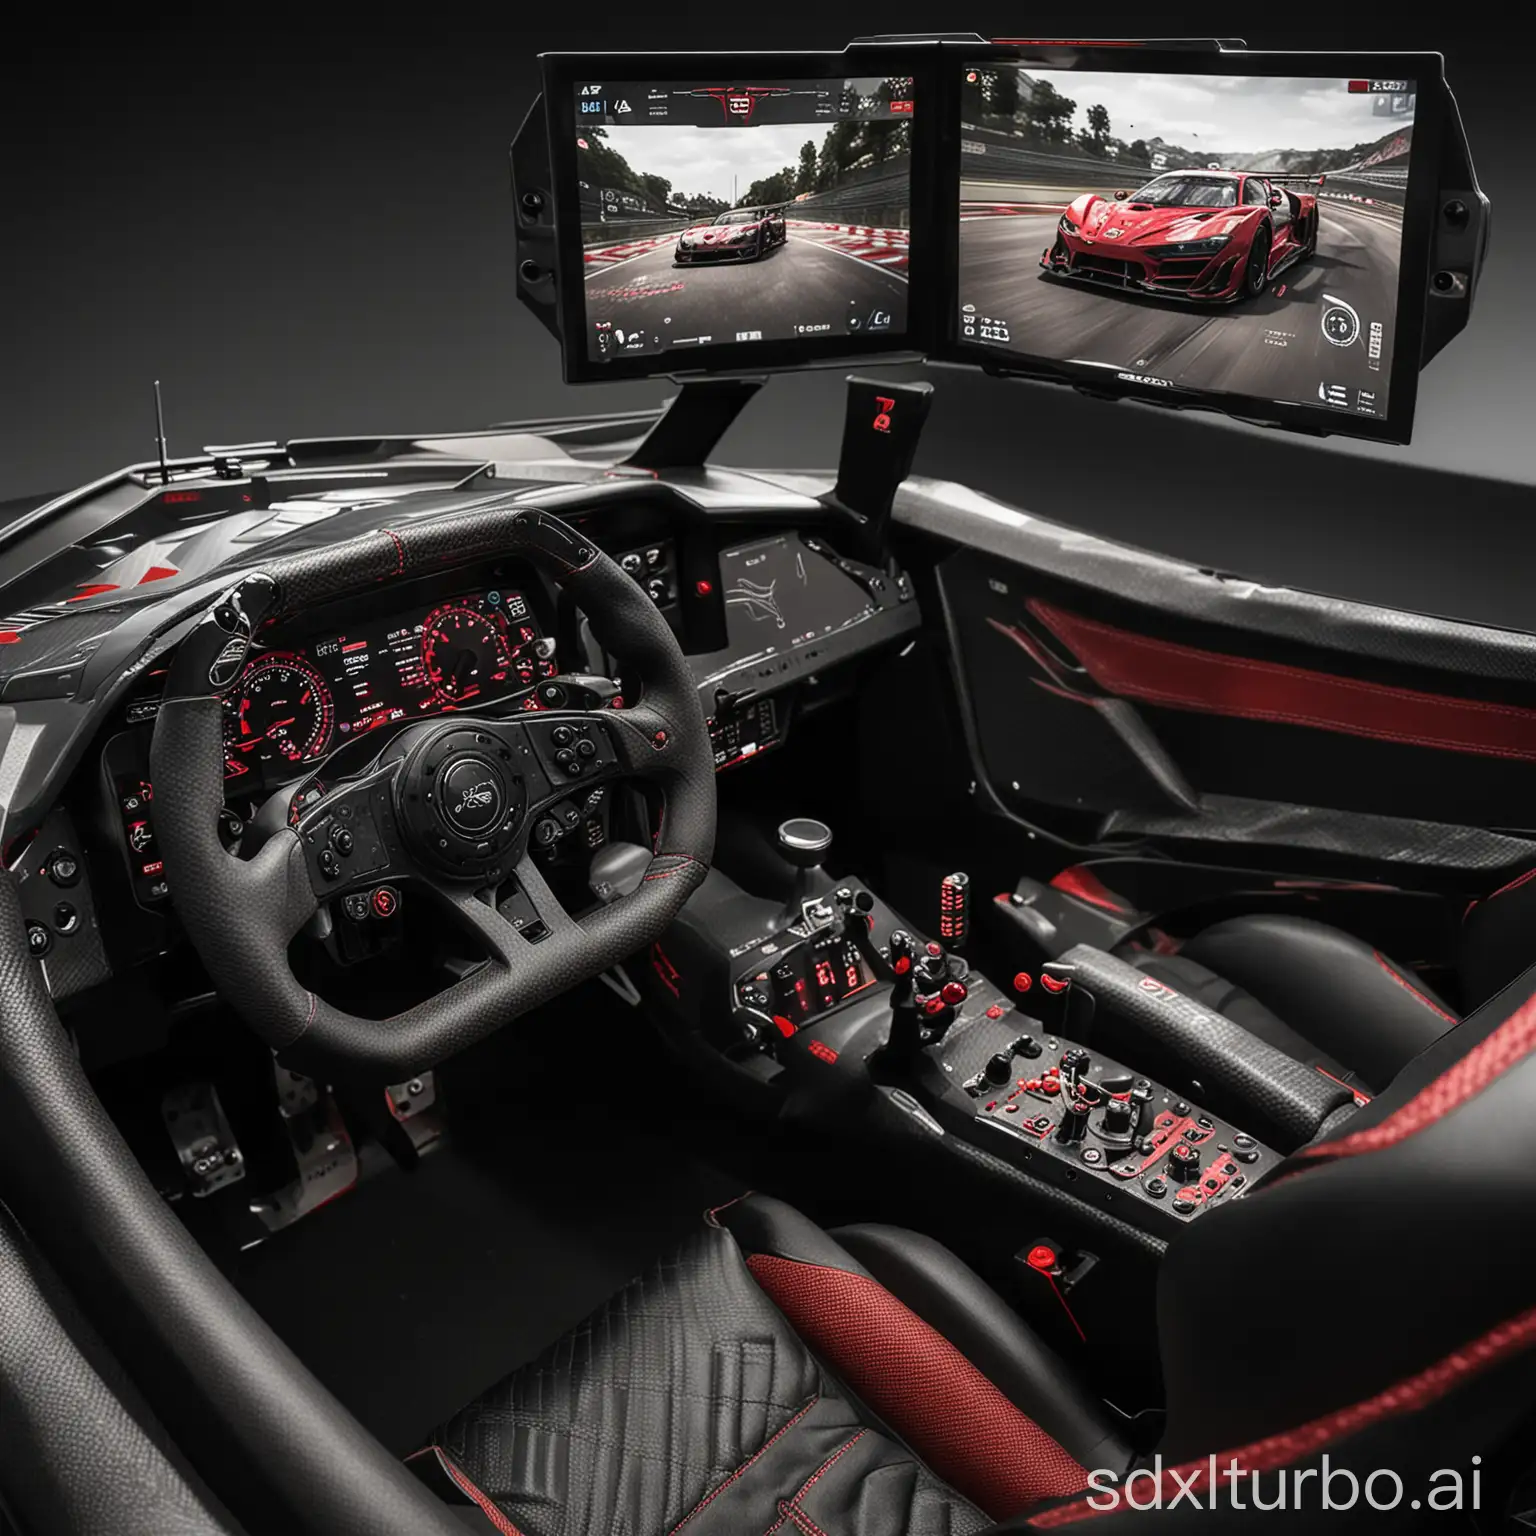 A close-up of a sim racing cockpit with carbon fiber accents and a steering wheel with a red stitching. The cockpit is positioned in front of a large screen displaying a racing game.